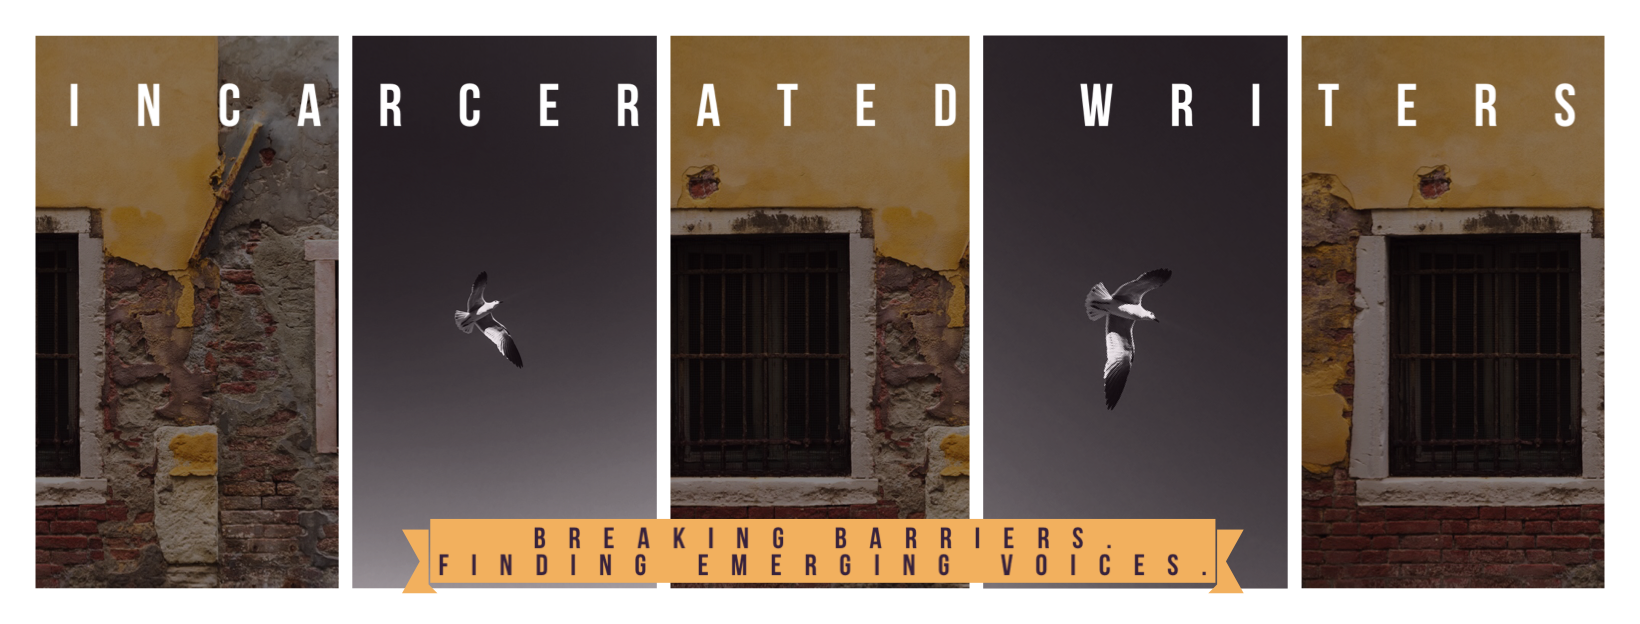 Incarcerated Writers, Breaking barriers finding emerging voices